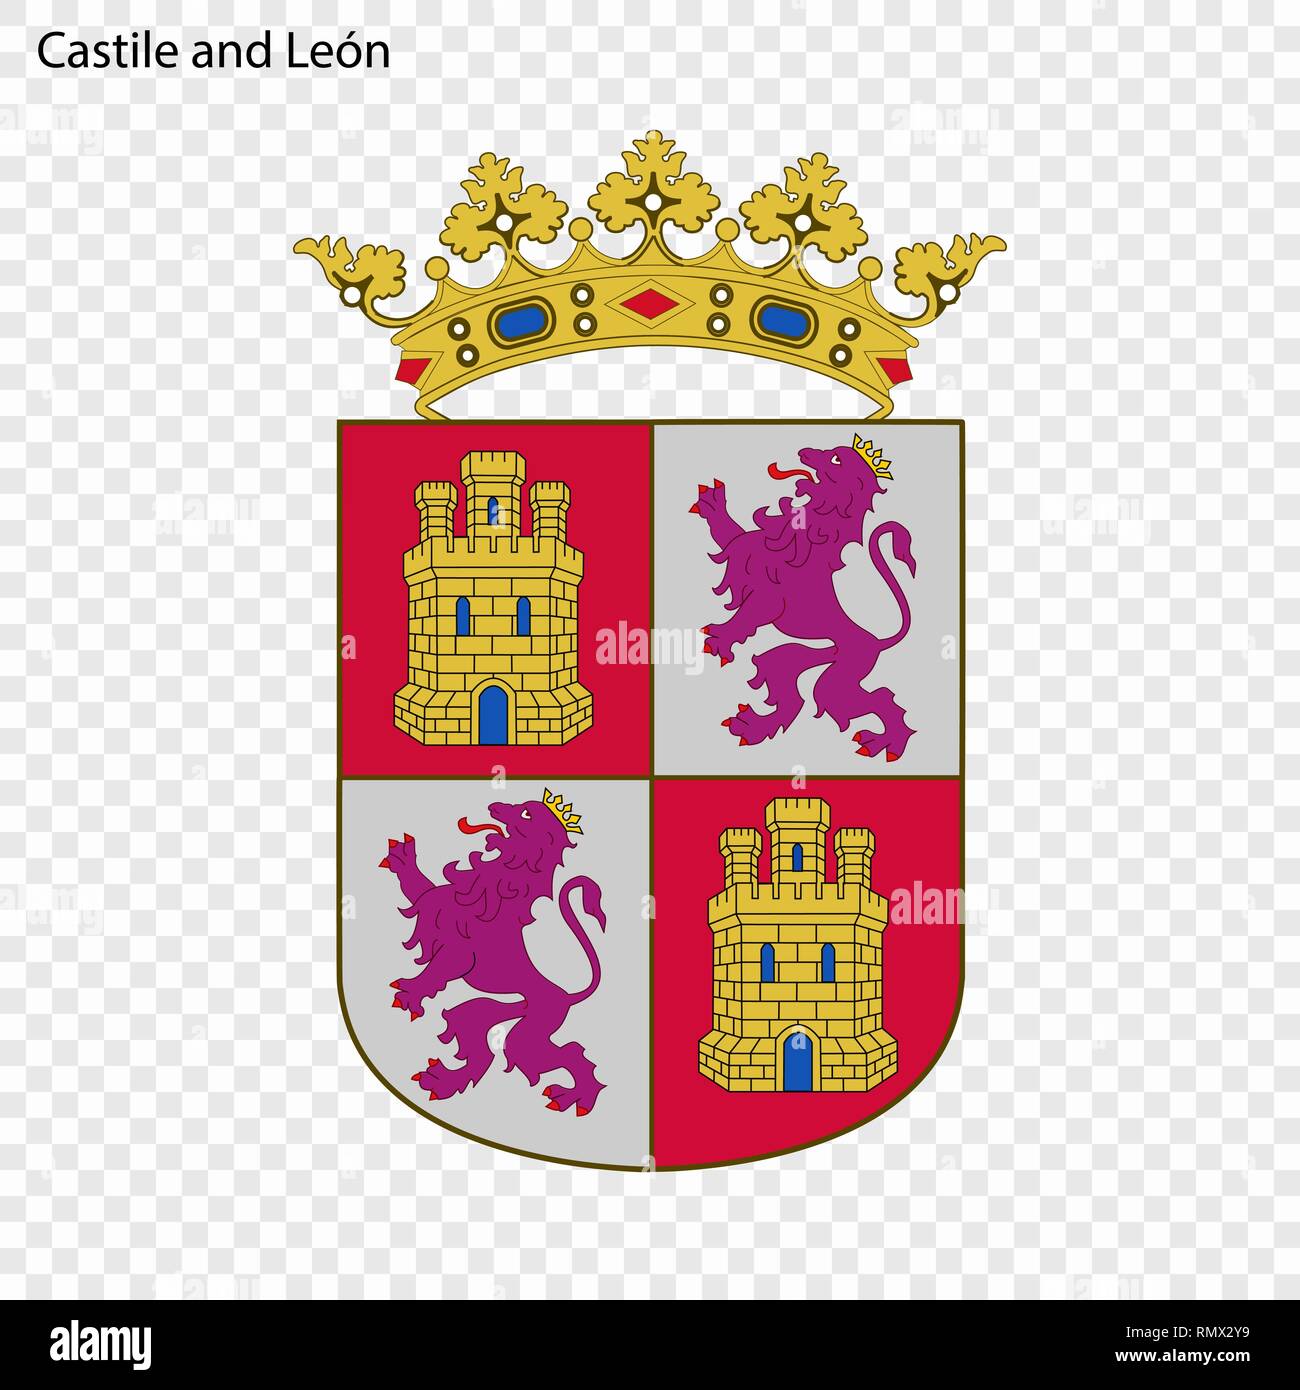 Emblem of Castile and Leon, province of Spain. Vector illustration Stock Vector